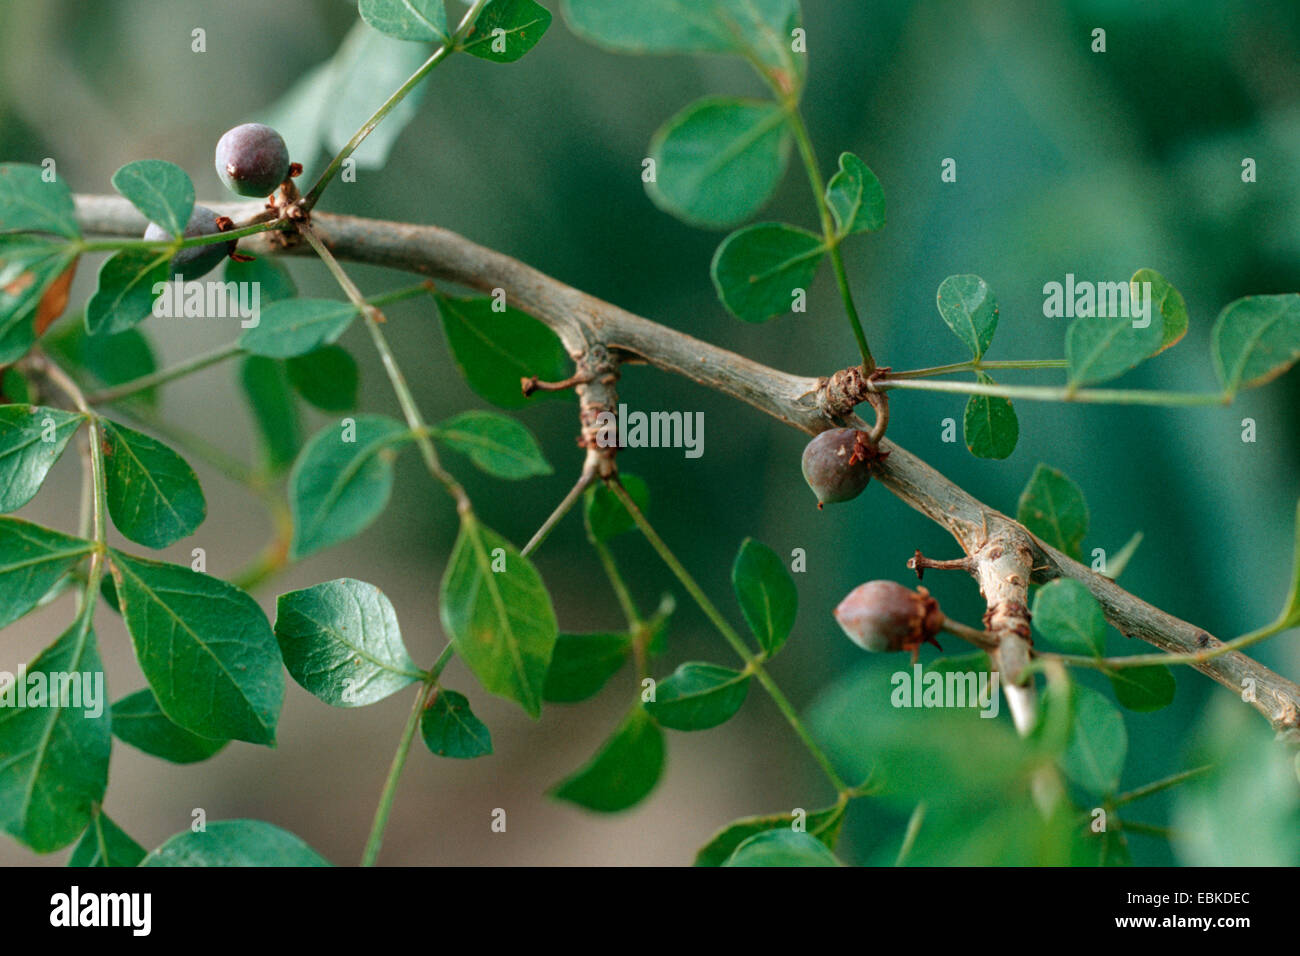 Balm Of Gilead (Commiphora opobalsamum, Amyris opobalsamum), twig with fruits Stock Photo